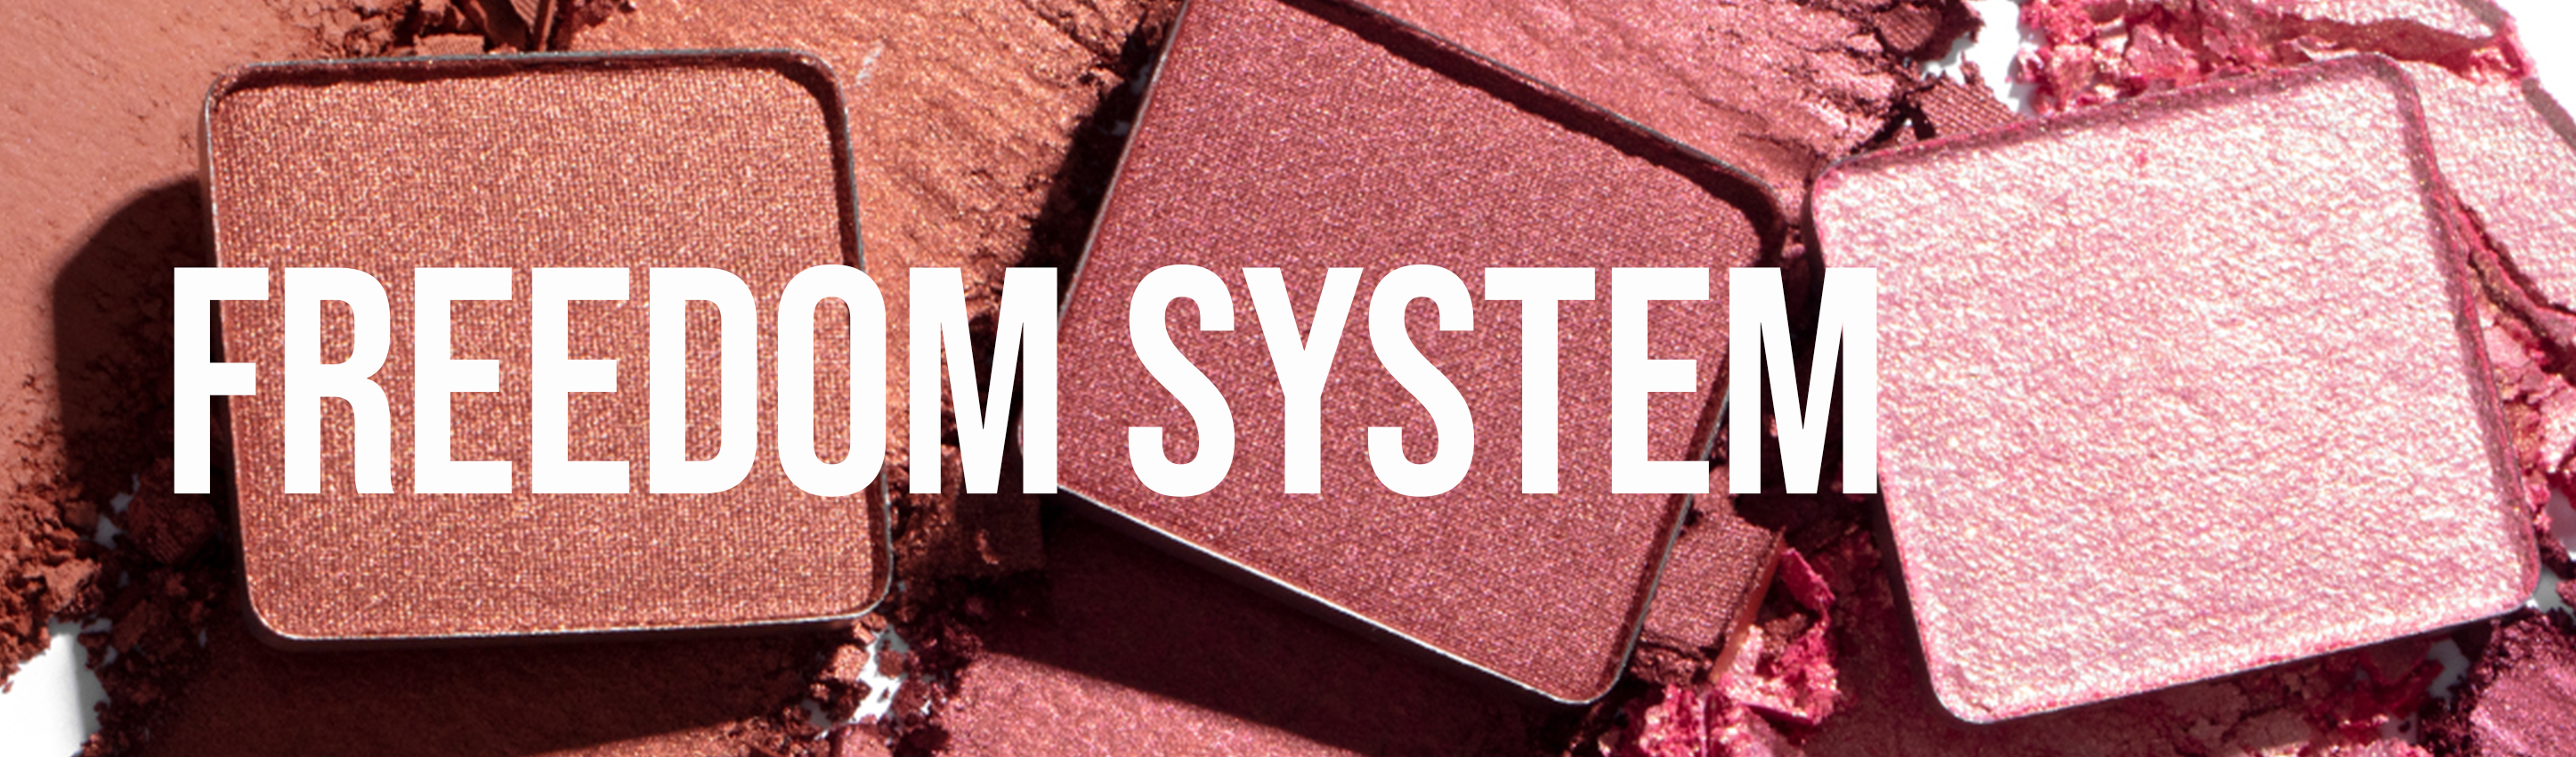 Paletas personalizables Freedom system INGLOT